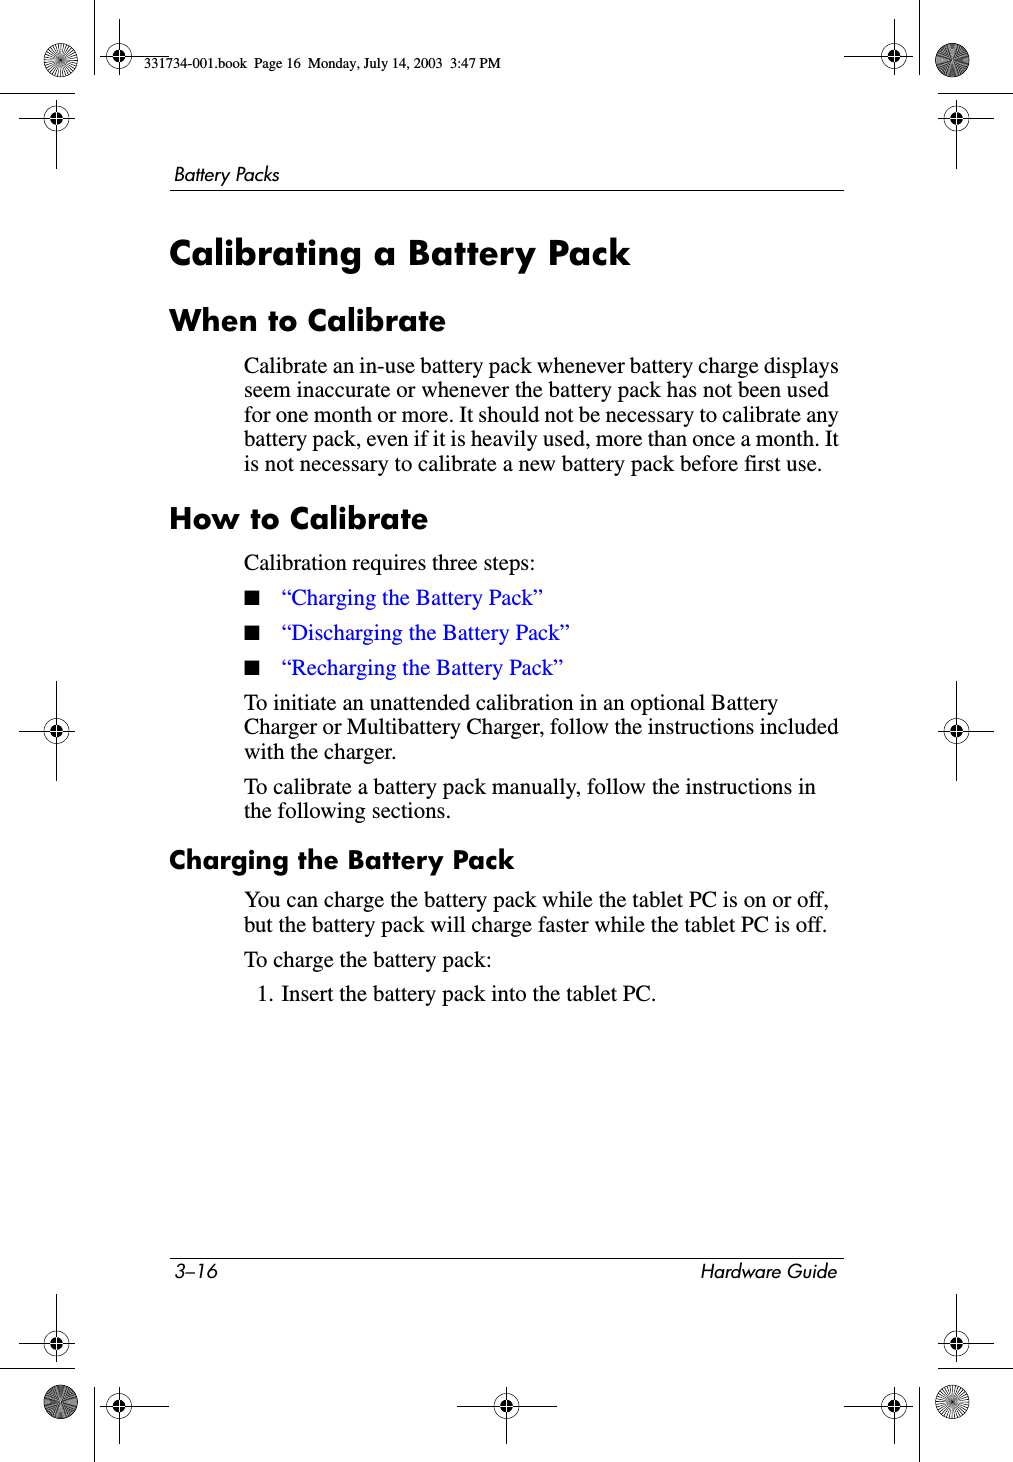 3–16 Hardware GuideBattery PacksCalibrating a Battery PackWhen to CalibrateCalibrate an in-use battery pack whenever battery charge displays seem inaccurate or whenever the battery pack has not been used for one month or more. It should not be necessary to calibrate any battery pack, even if it is heavily used, more than once a month. It is not necessary to calibrate a new battery pack before first use.How to CalibrateCalibration requires three steps: ■“Charging the Battery Pack”■“Discharging the Battery Pack”■“Recharging the Battery Pack”To initiate an unattended calibration in an optional Battery Charger or Multibattery Charger, follow the instructions included with the charger.To calibrate a battery pack manually, follow the instructions in the following sections.Charging the Battery PackYou can charge the battery pack while the tablet PC is on or off, but the battery pack will charge faster while the tablet PC is off.To charge the battery pack:1. Insert the battery pack into the tablet PC.331734-001.book  Page 16  Monday, July 14, 2003  3:47 PM